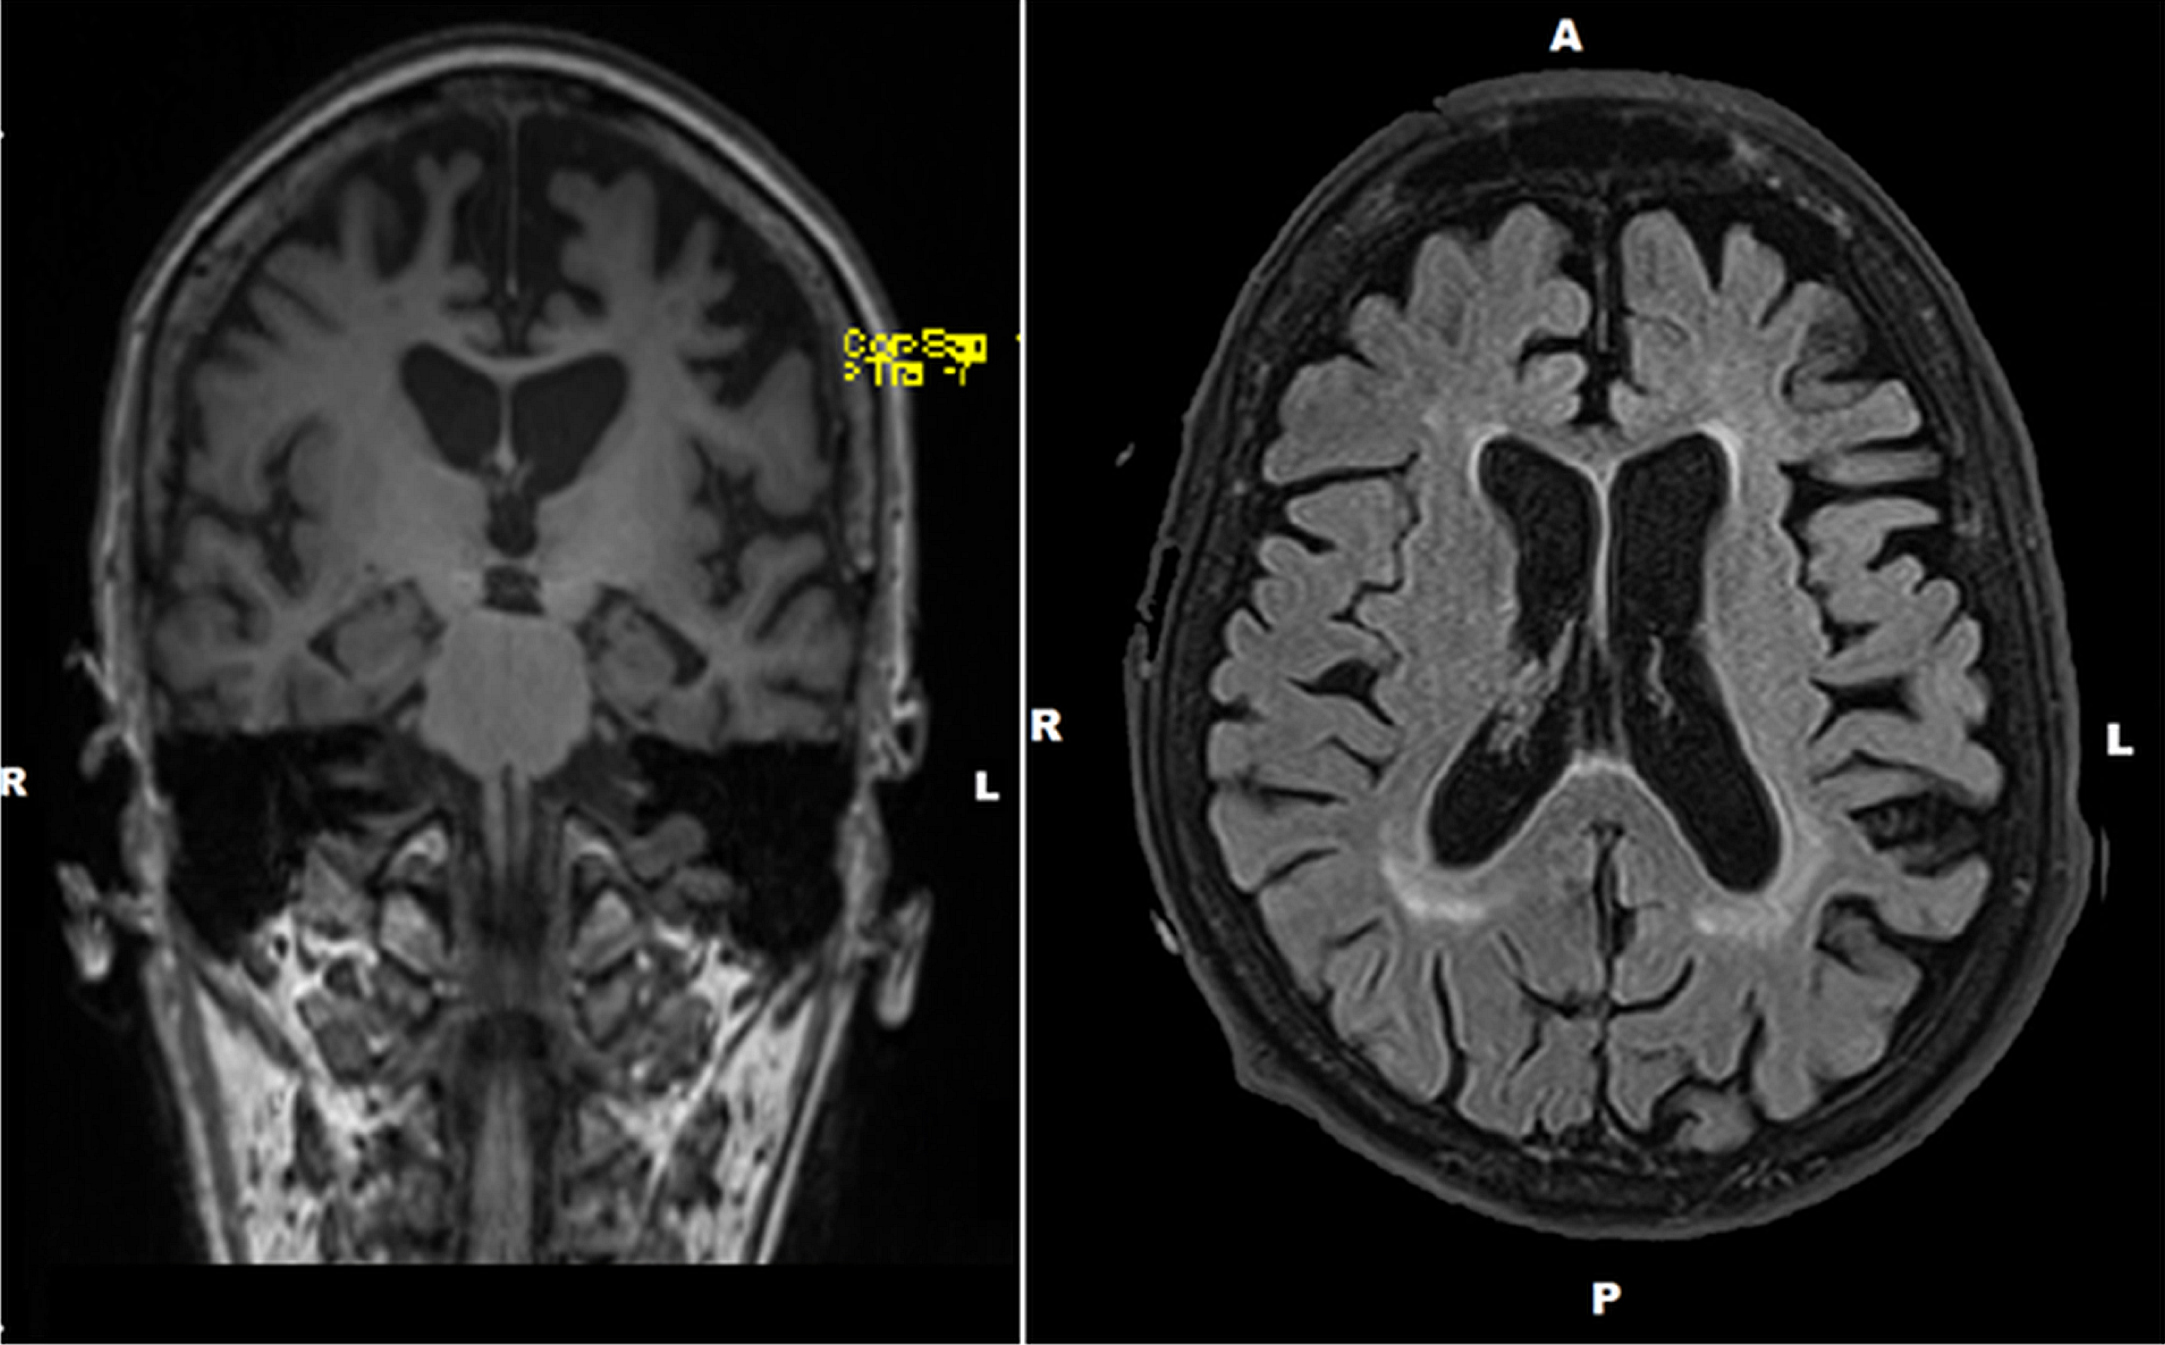 Preoperative brain MRIs (left: coronal view; right: sagittal view) of the patient. MRI brain scan revealed diffuse cortical atrophy; the frontal and temporal lobes were the most affected, predominantly on the left side.